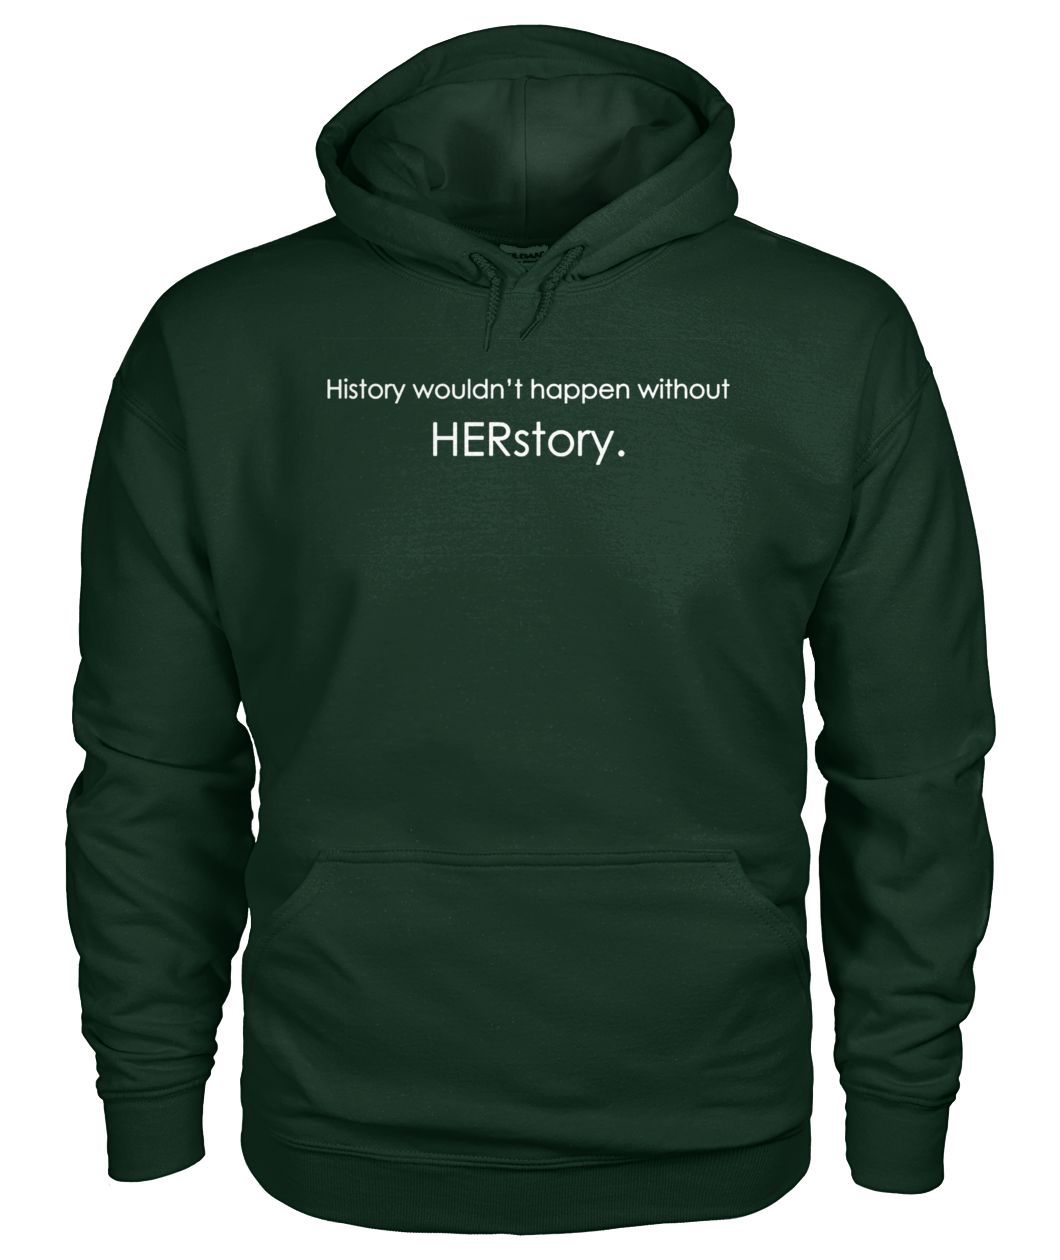 History wouldn't happen without herstory gildan hoodie